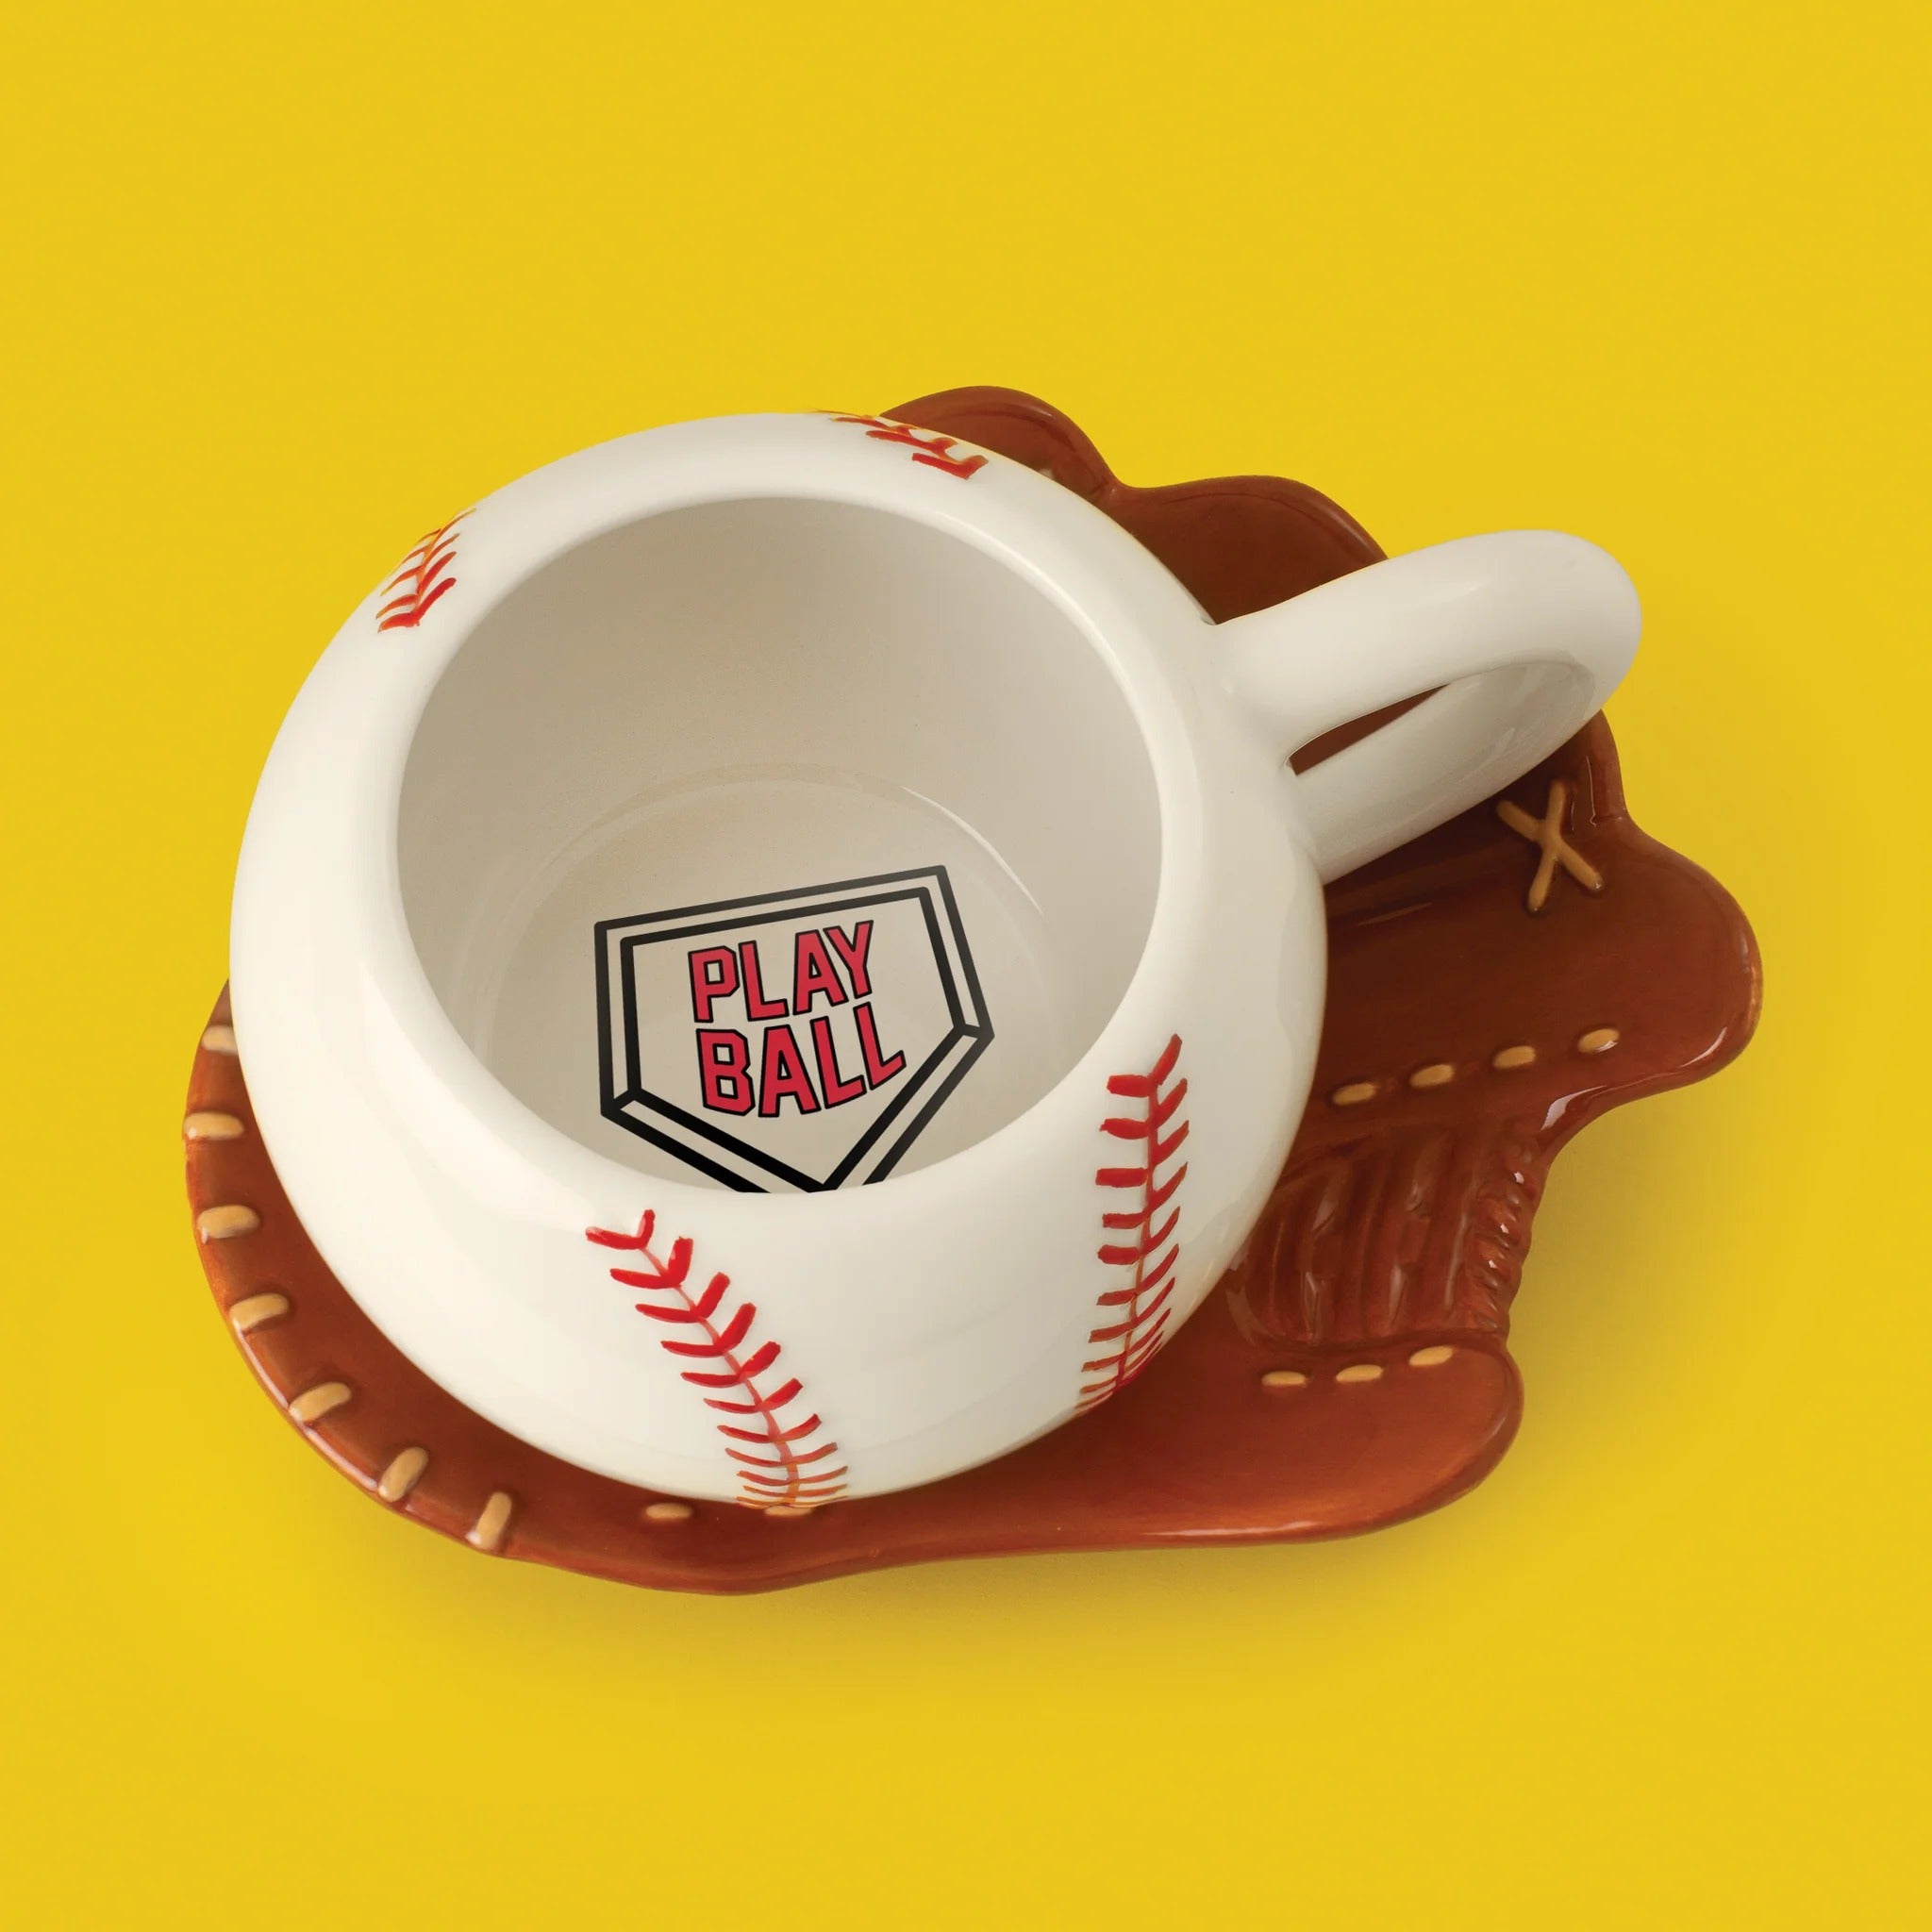 Sip from an MLB team encyclopedic entry mug, full of facts and figures